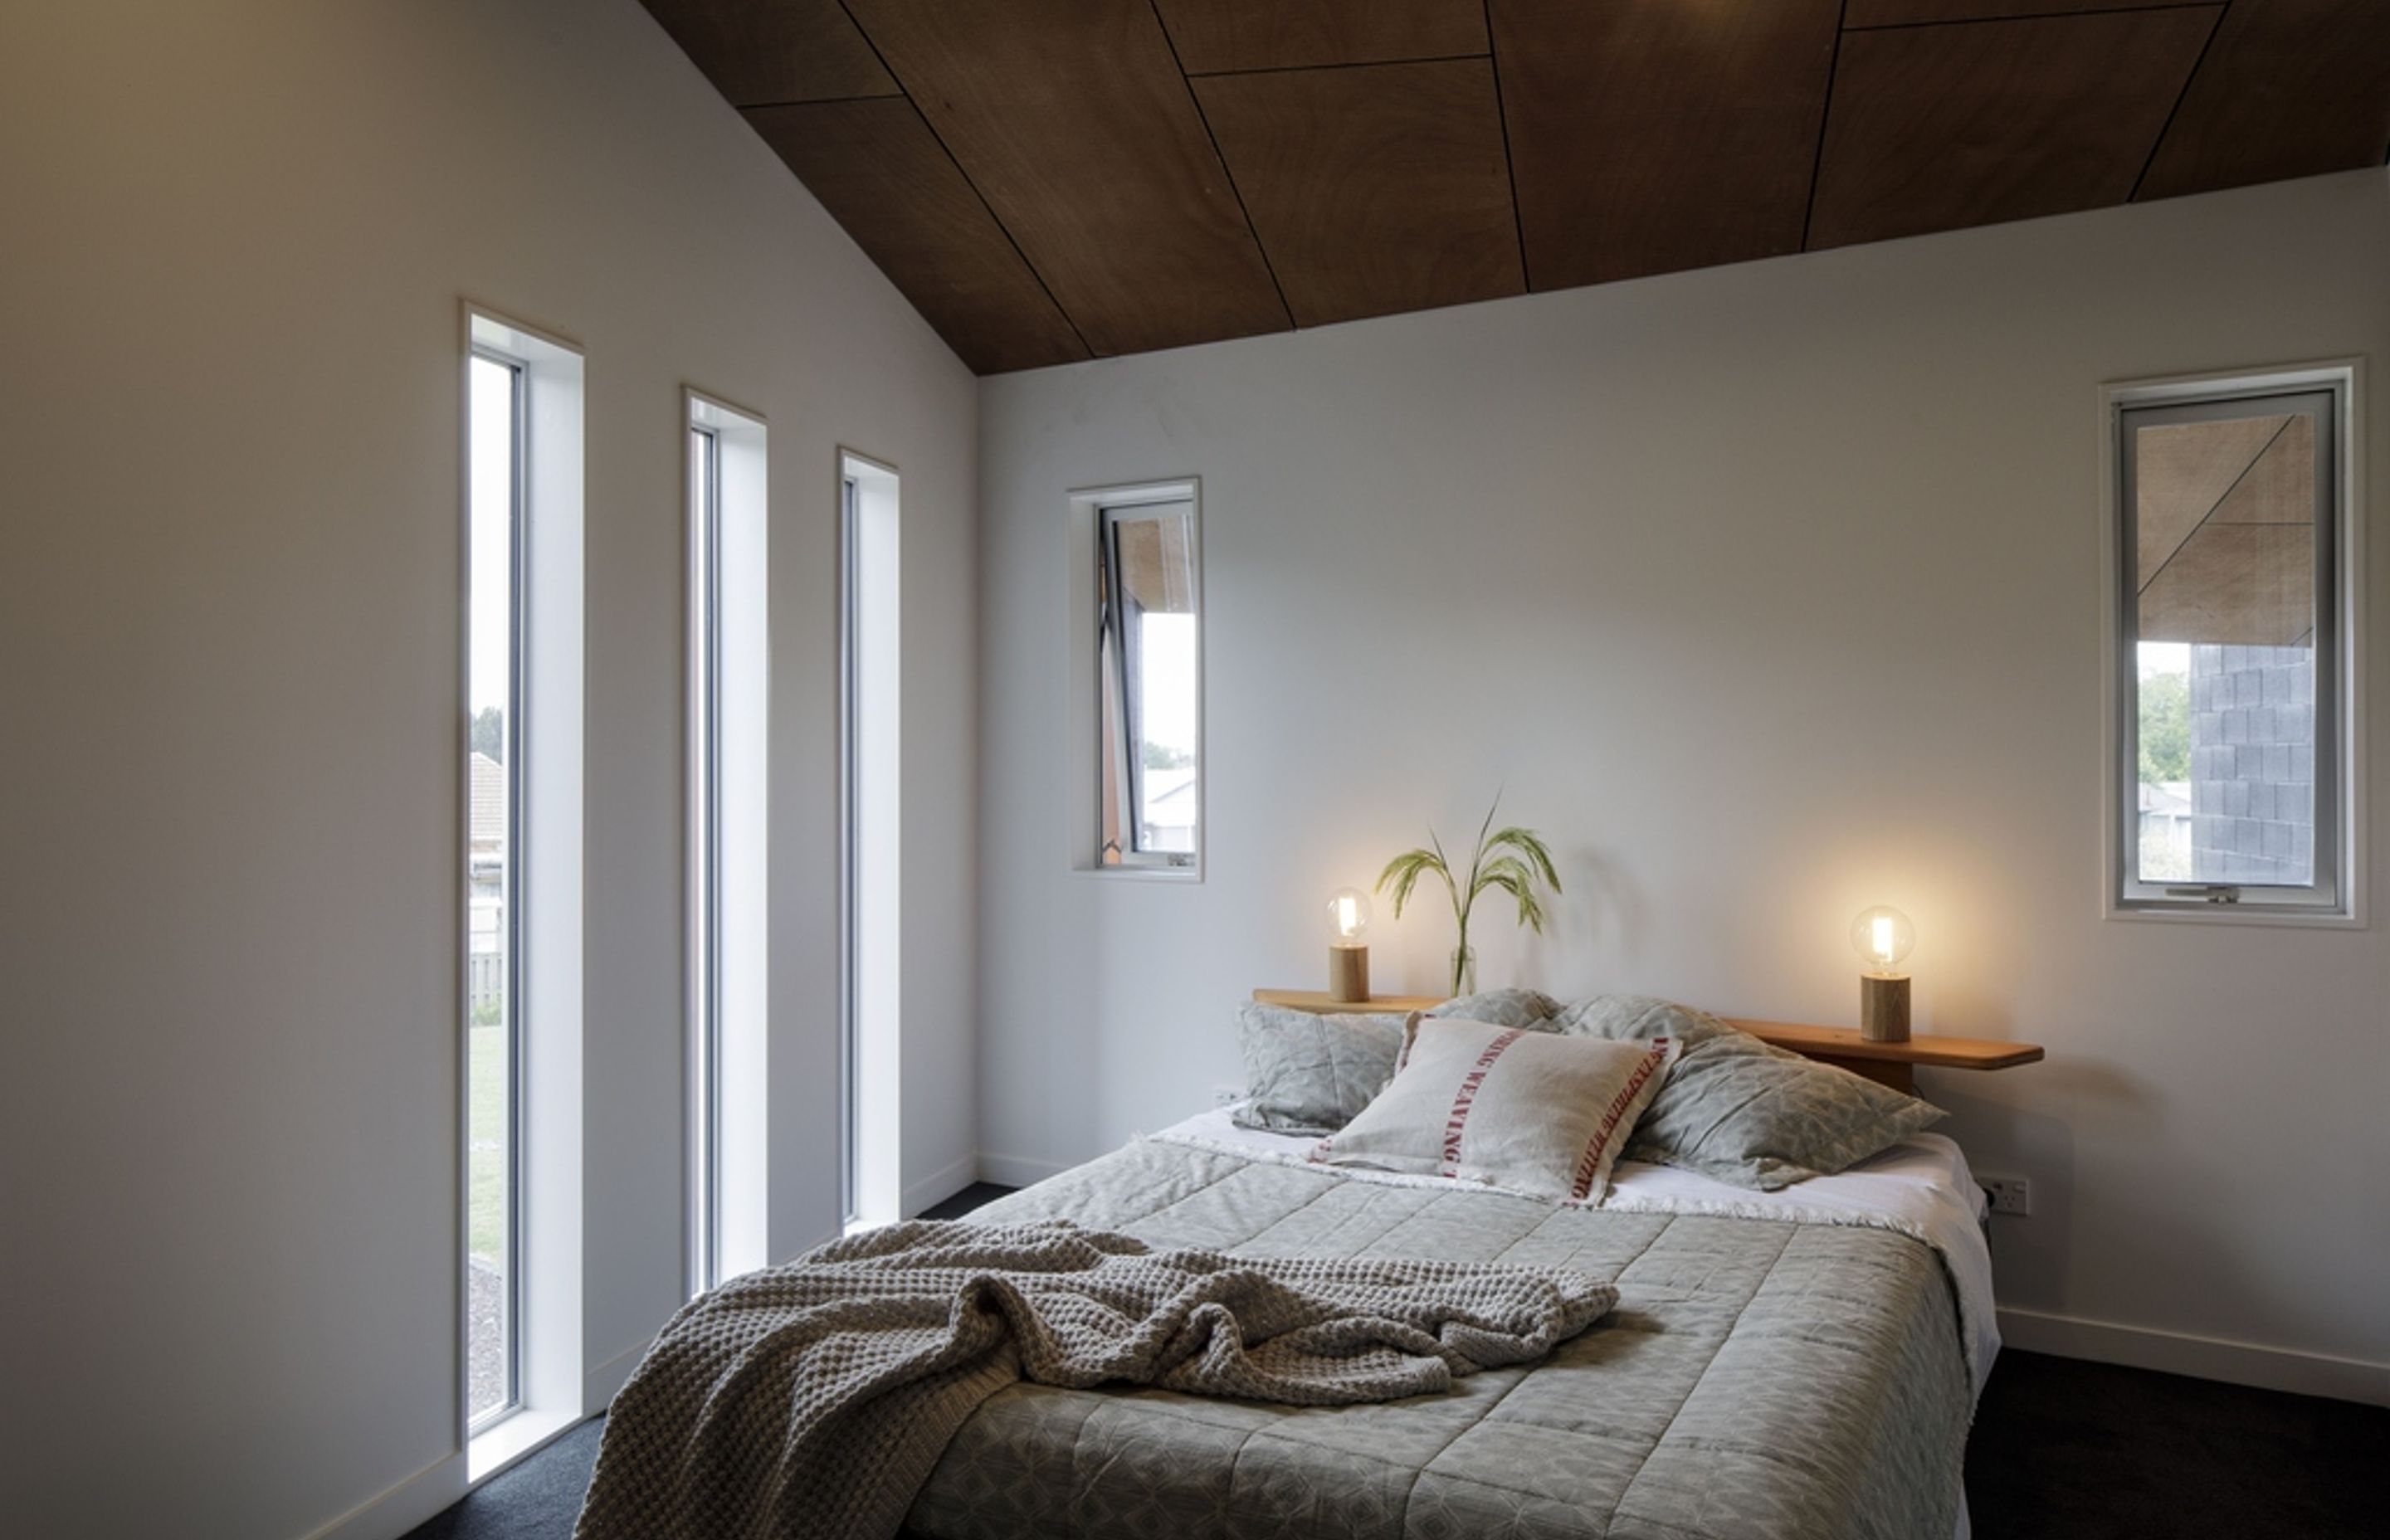 A pale, muted colour scheme ensures the architecture remains 'the star' feature in one of the bedrooms. A timber-panelled ceiling and lush, dark carpet add constrast.